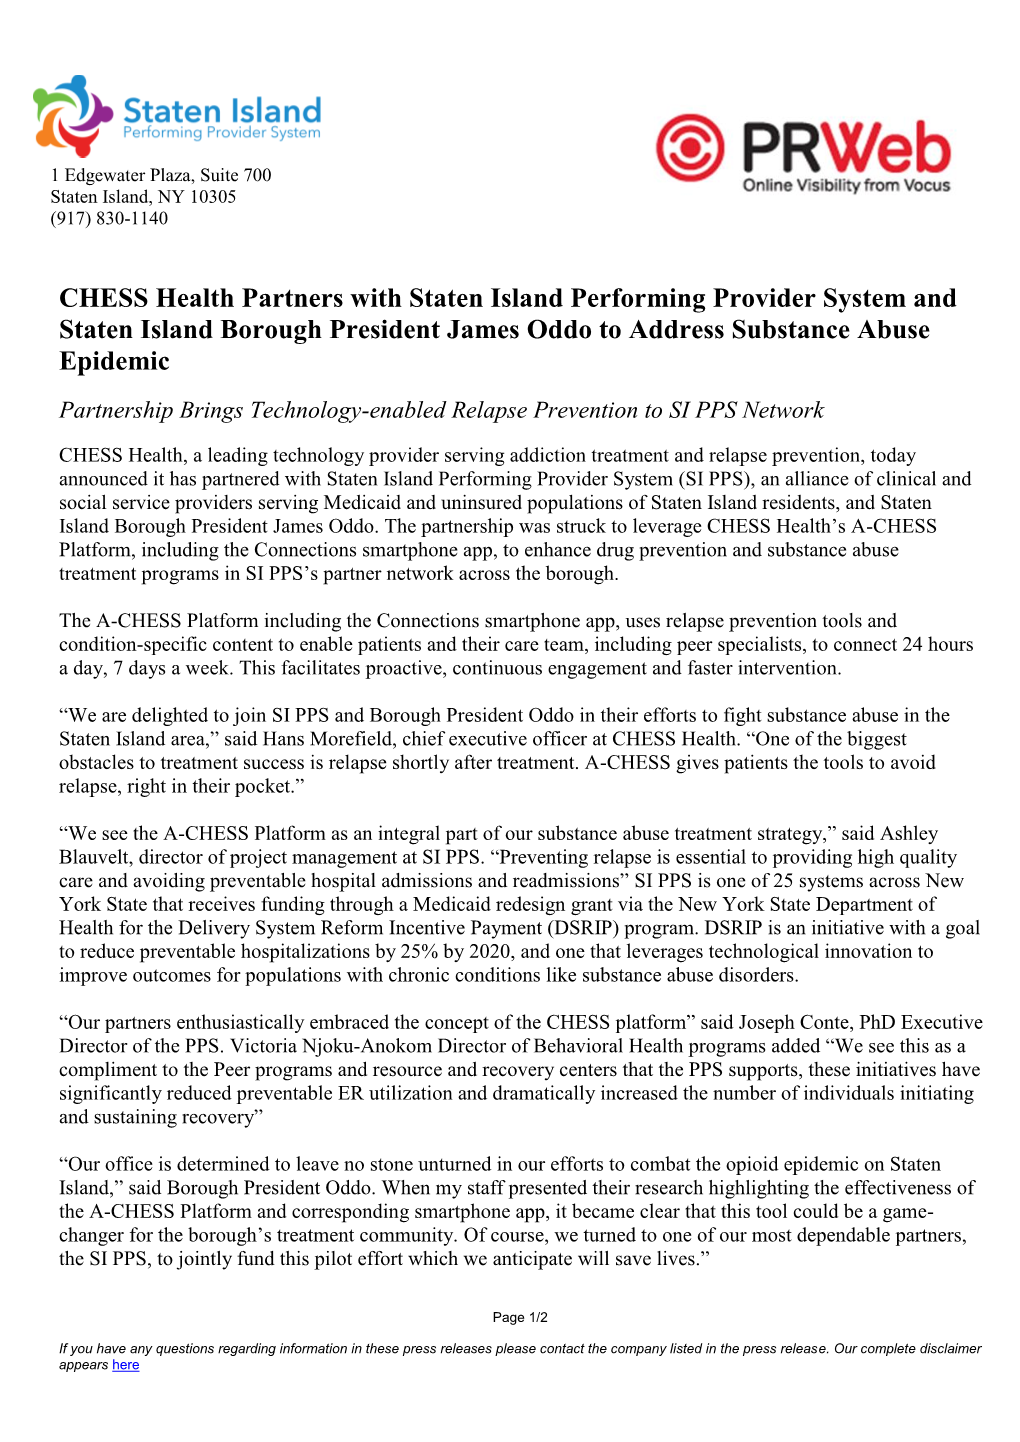 CHESS Health Partners with Staten Island Performing Provider System